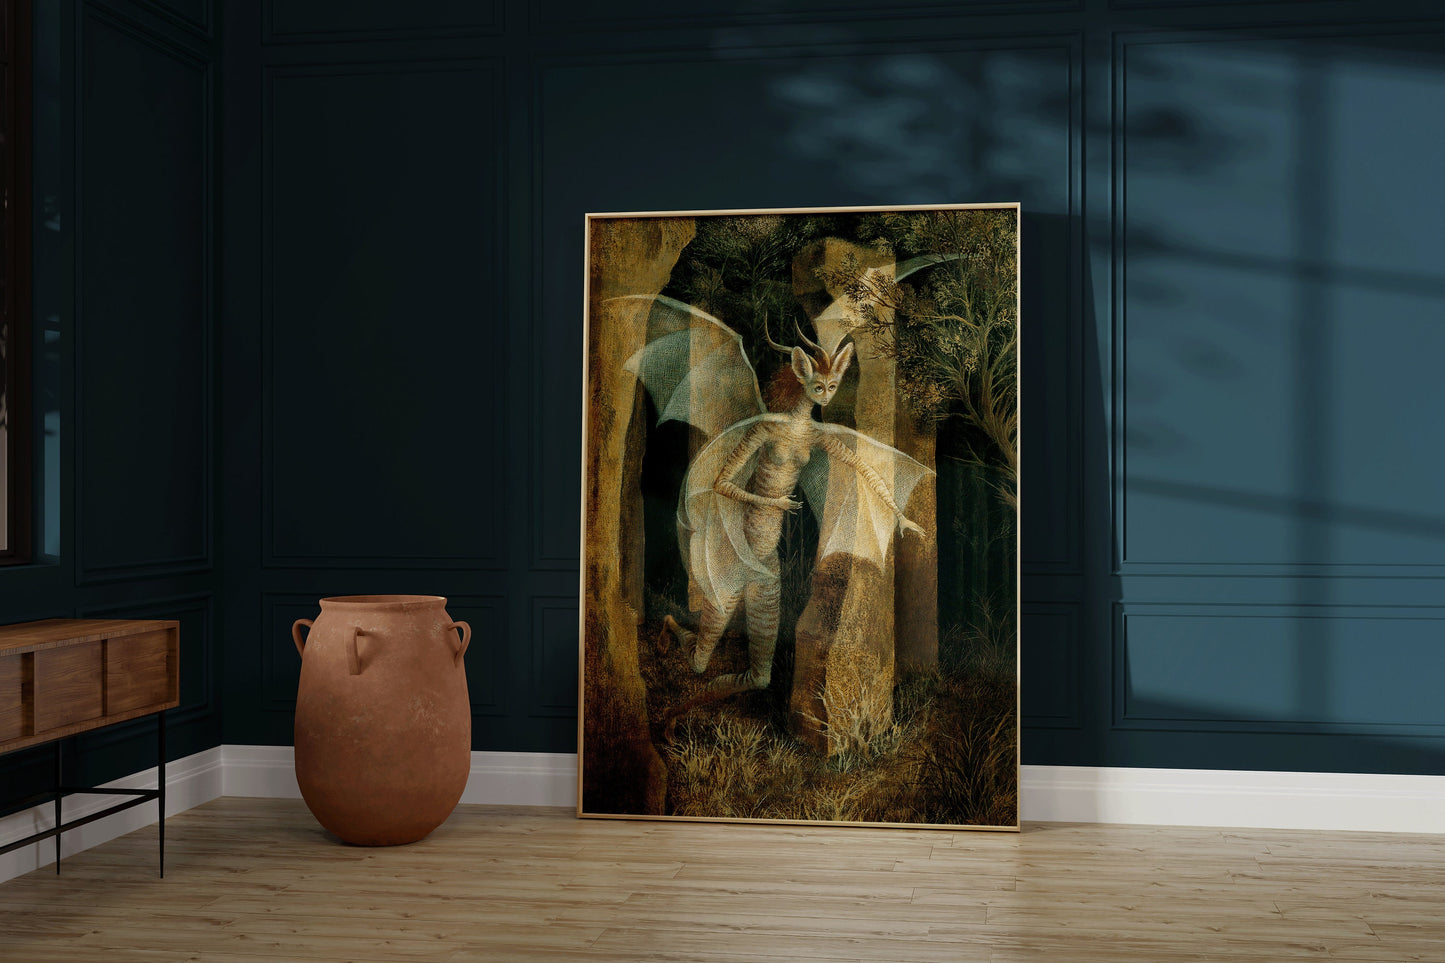 Remedios Varo The Call Fine Surreal Art Famous Mexican Iconic Painting Vintage Ready to hang Framed Home Office Decor Print Gift Idea